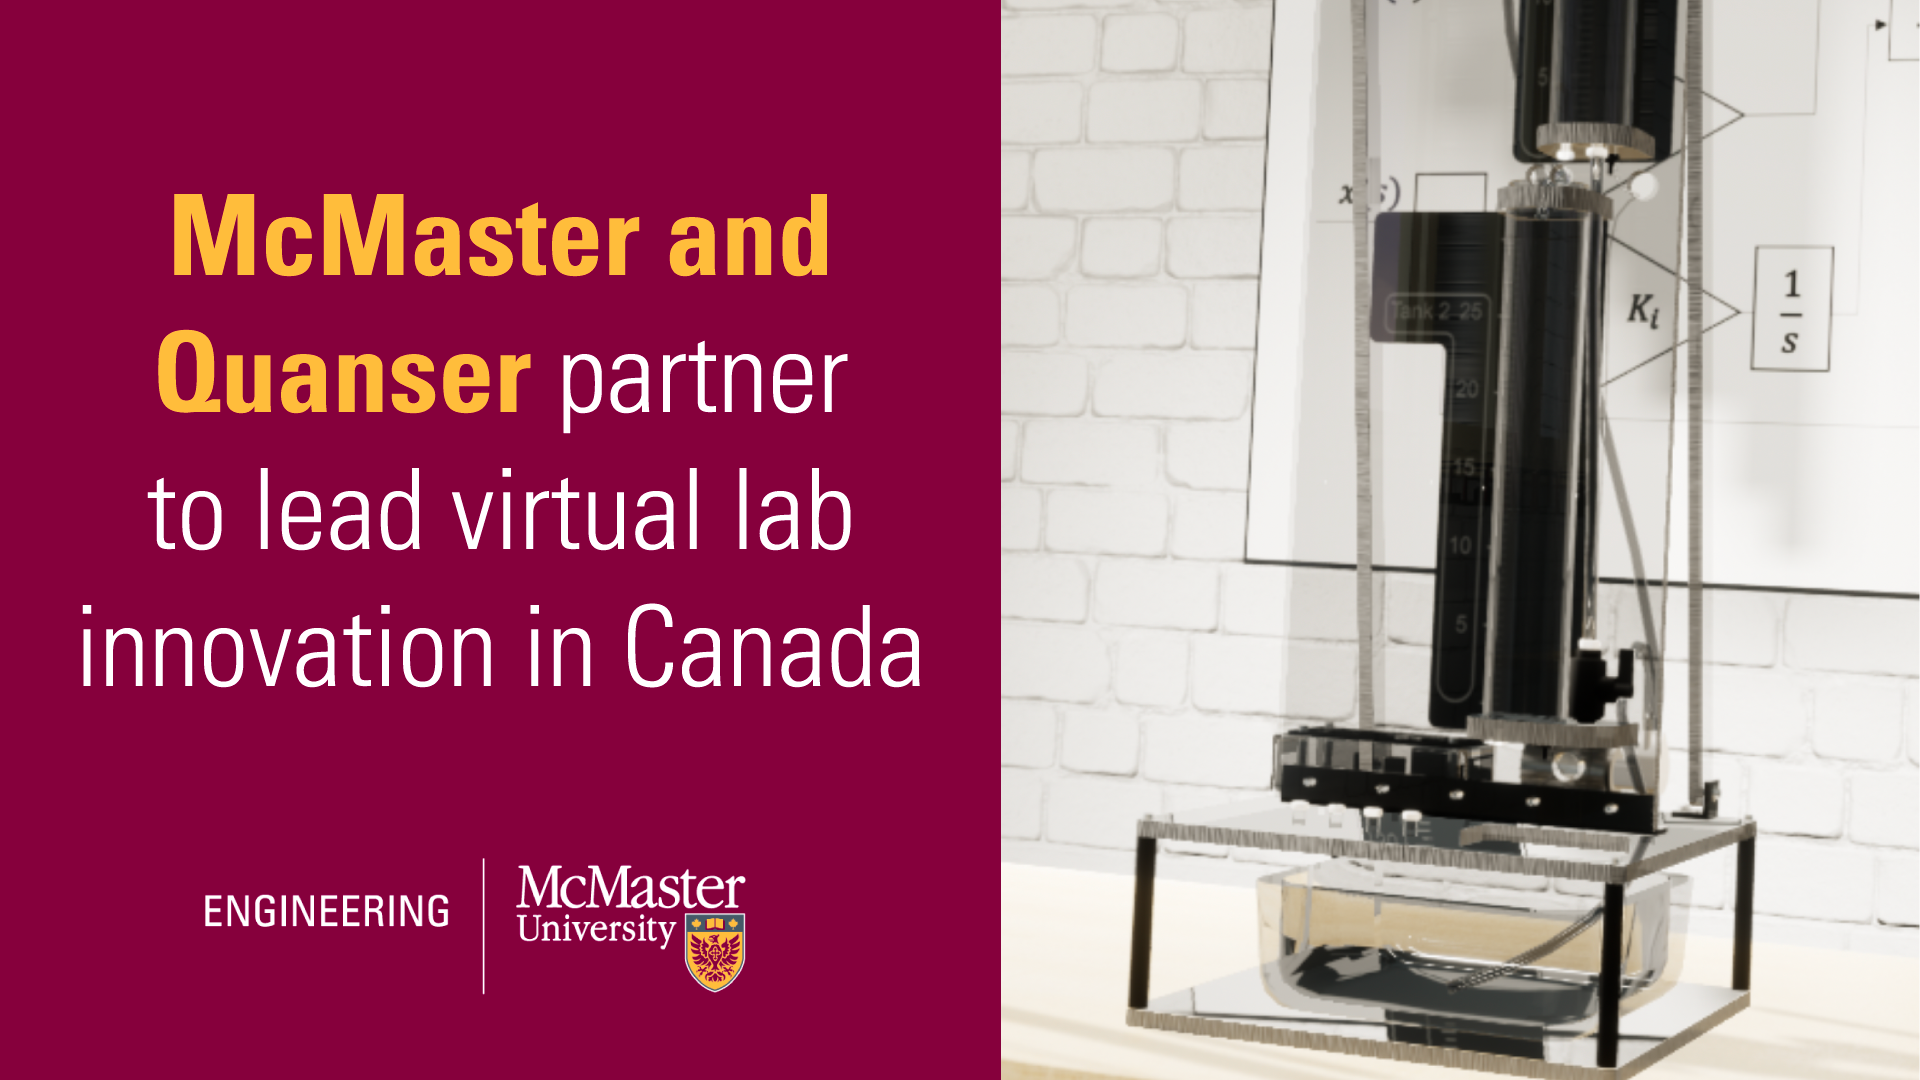 McMaster and Quanser partner to lead virtual lab innovation in Canadian engineering education